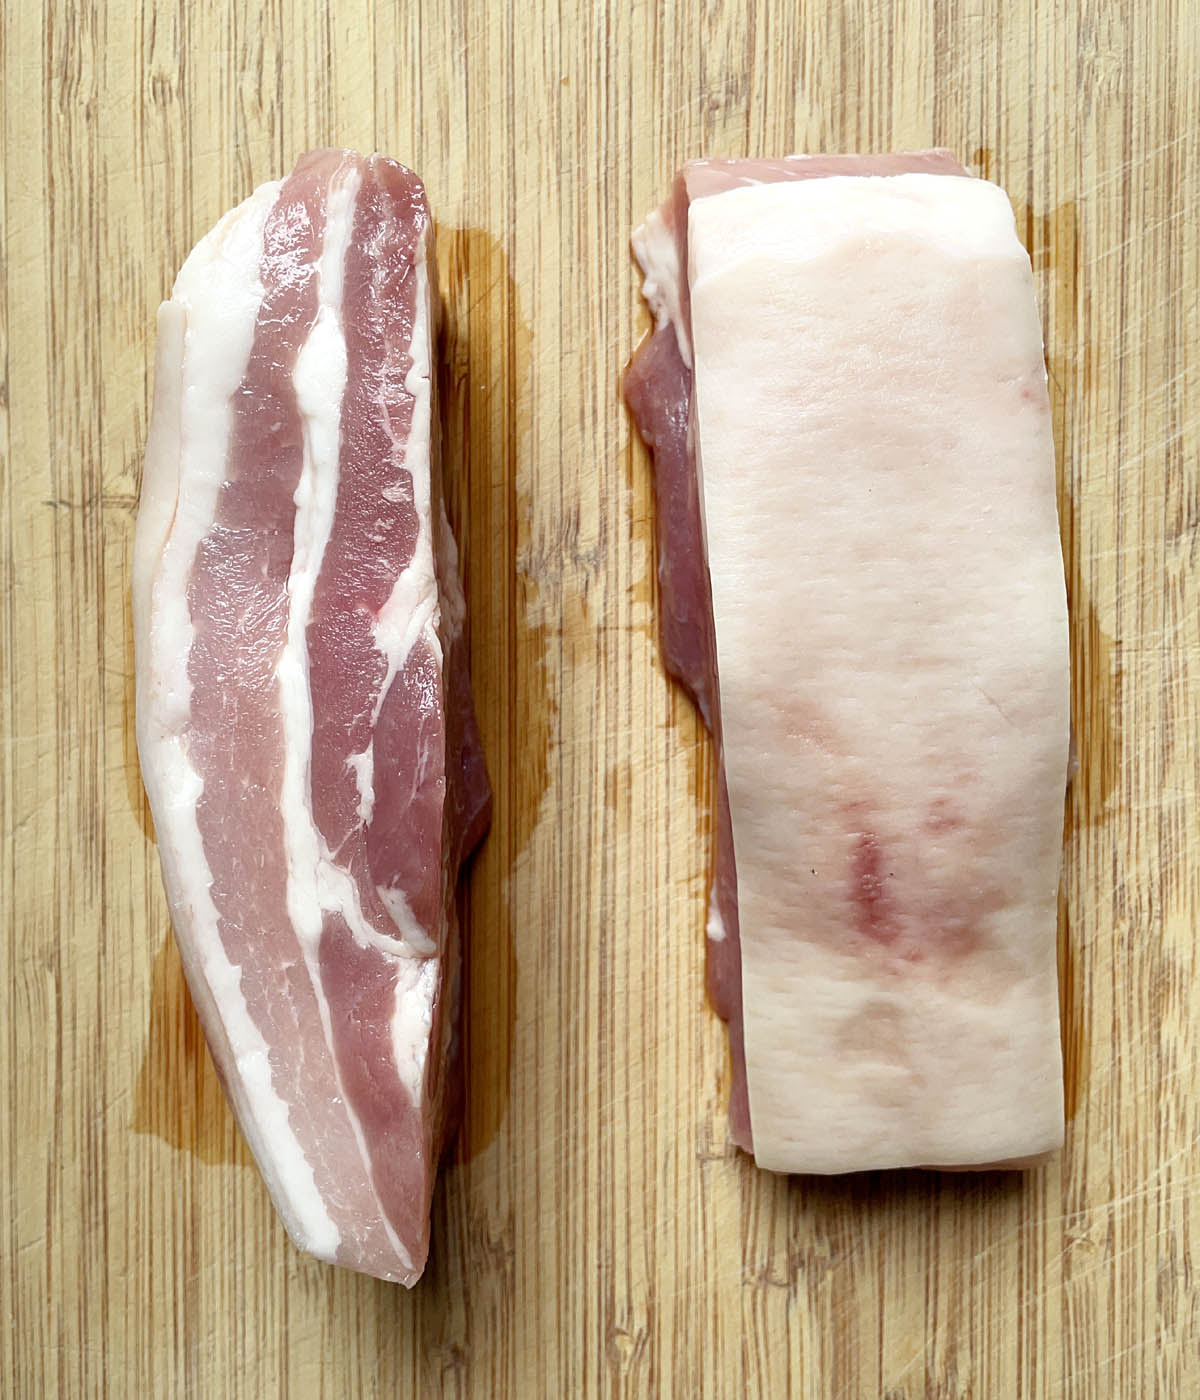 Two pieces of raw pork belly, one piece on its side.